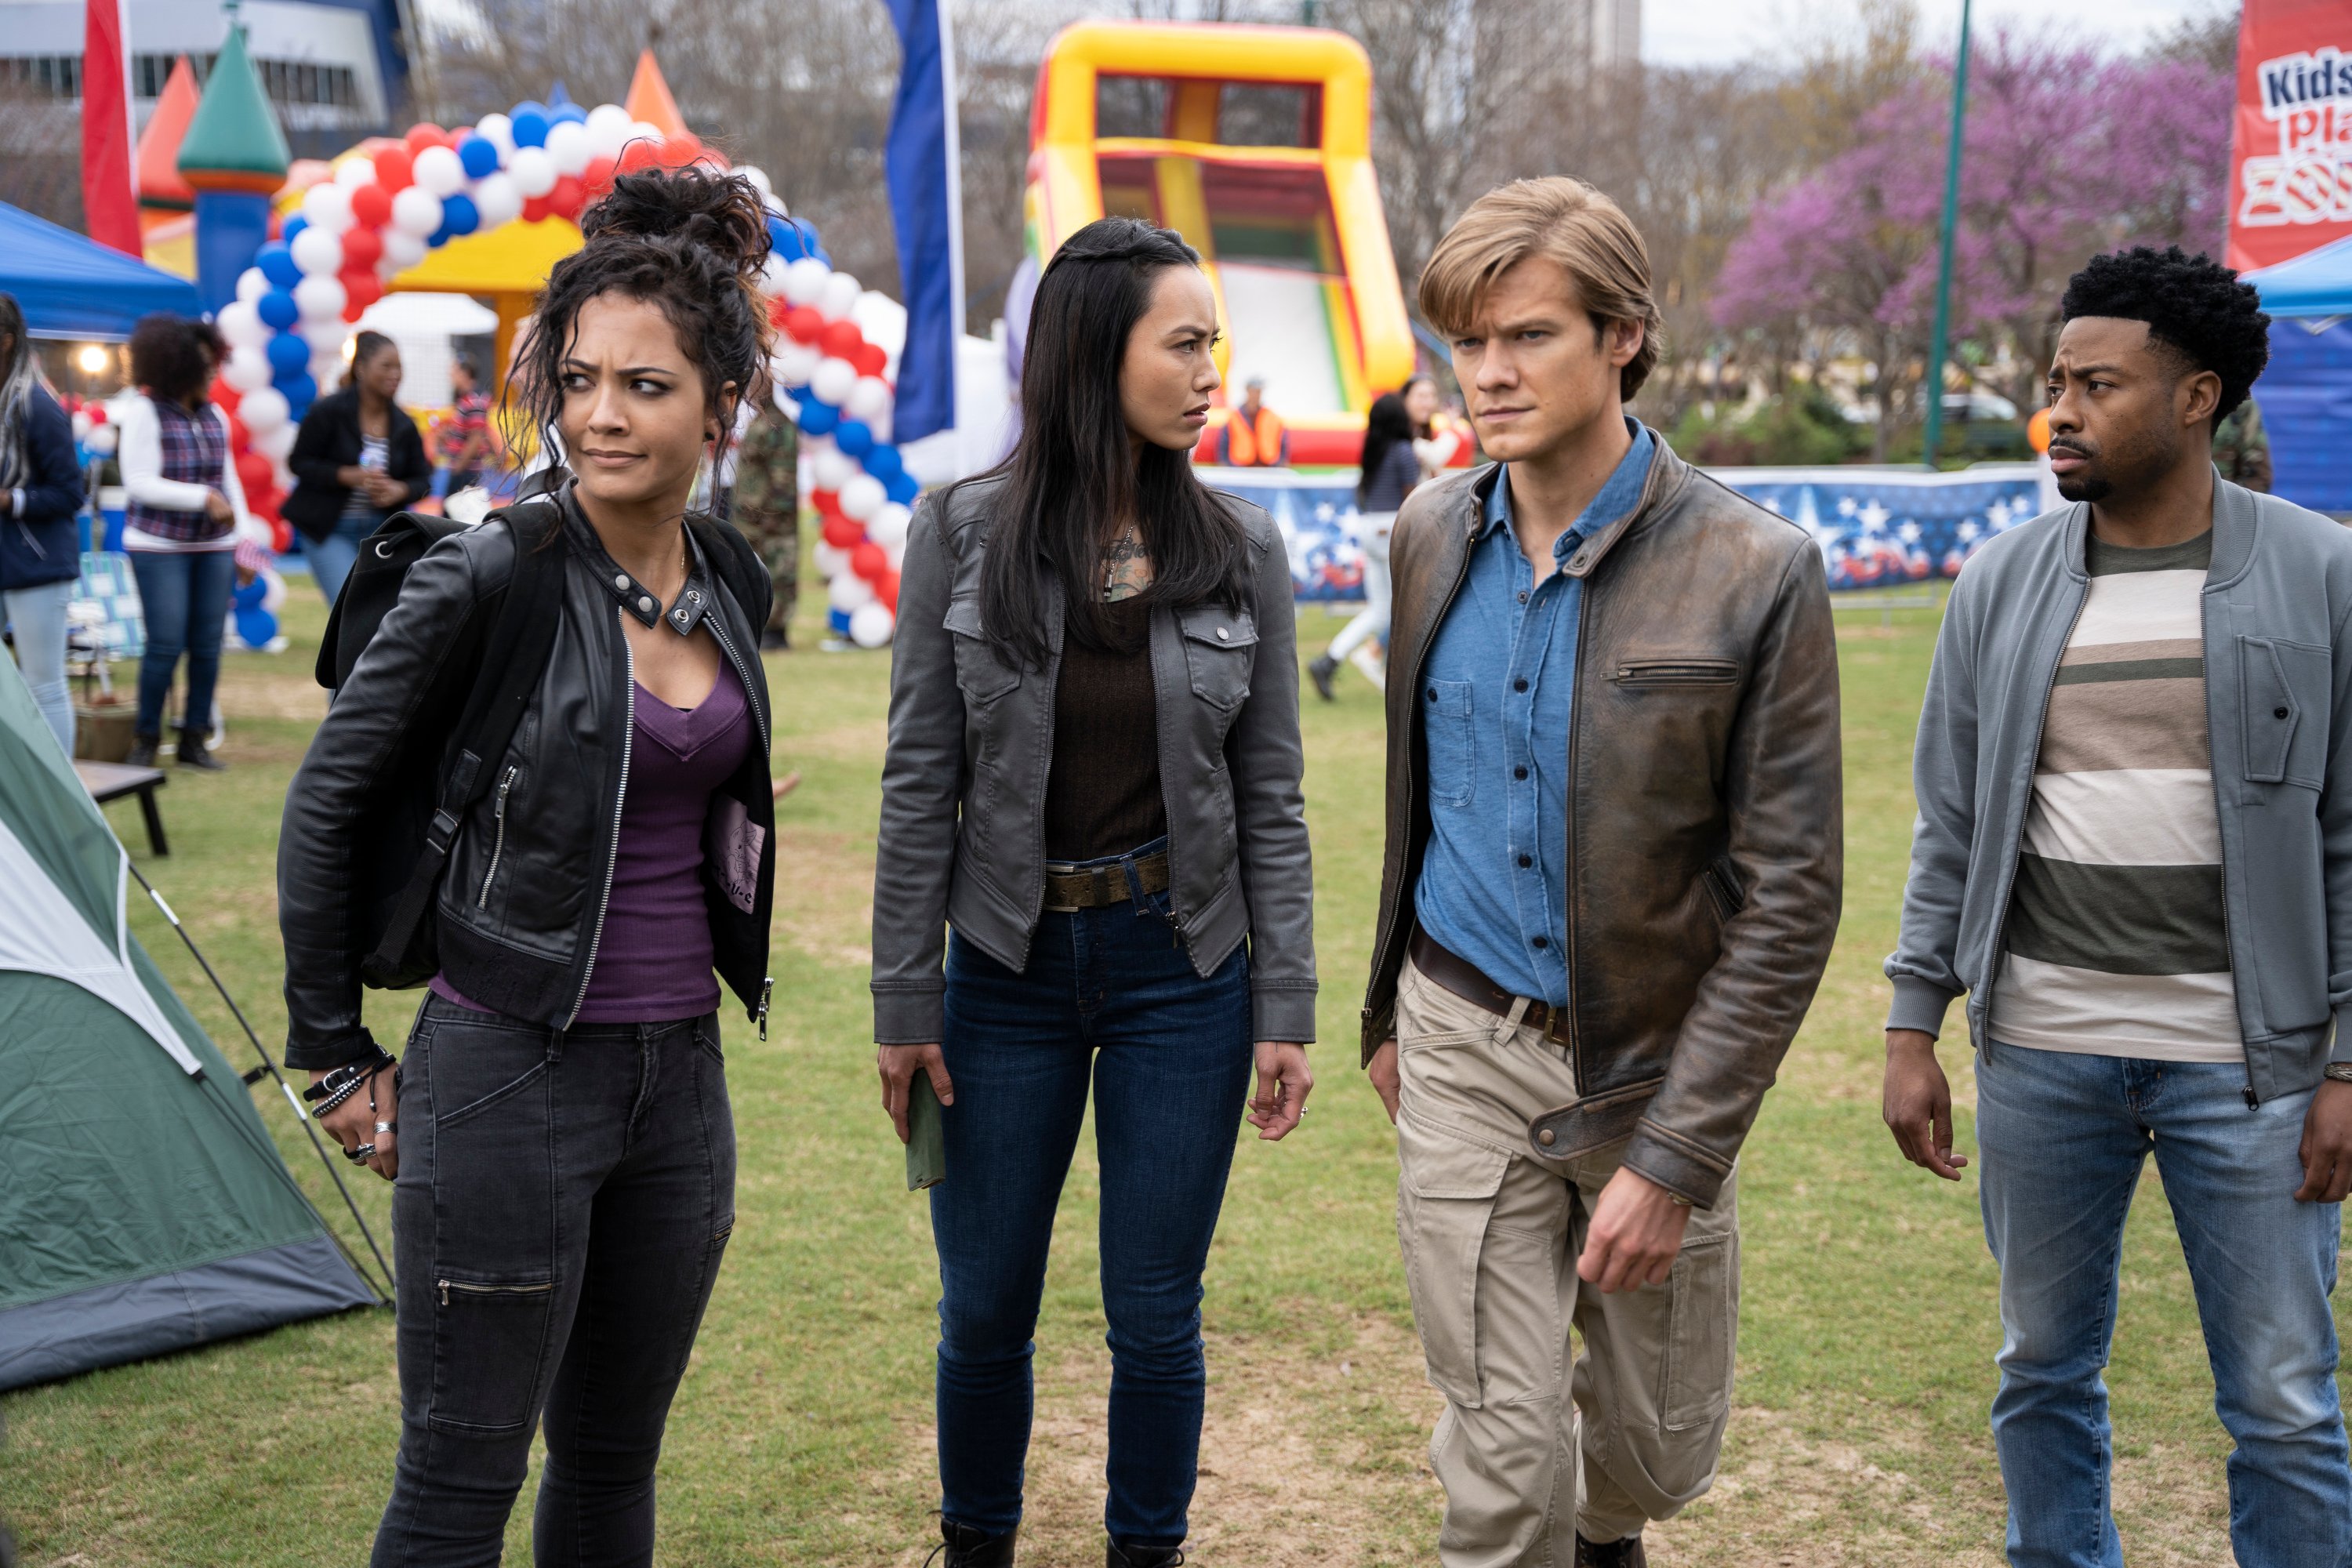 MacGyver cast members at fair in a scene from the show's series finale